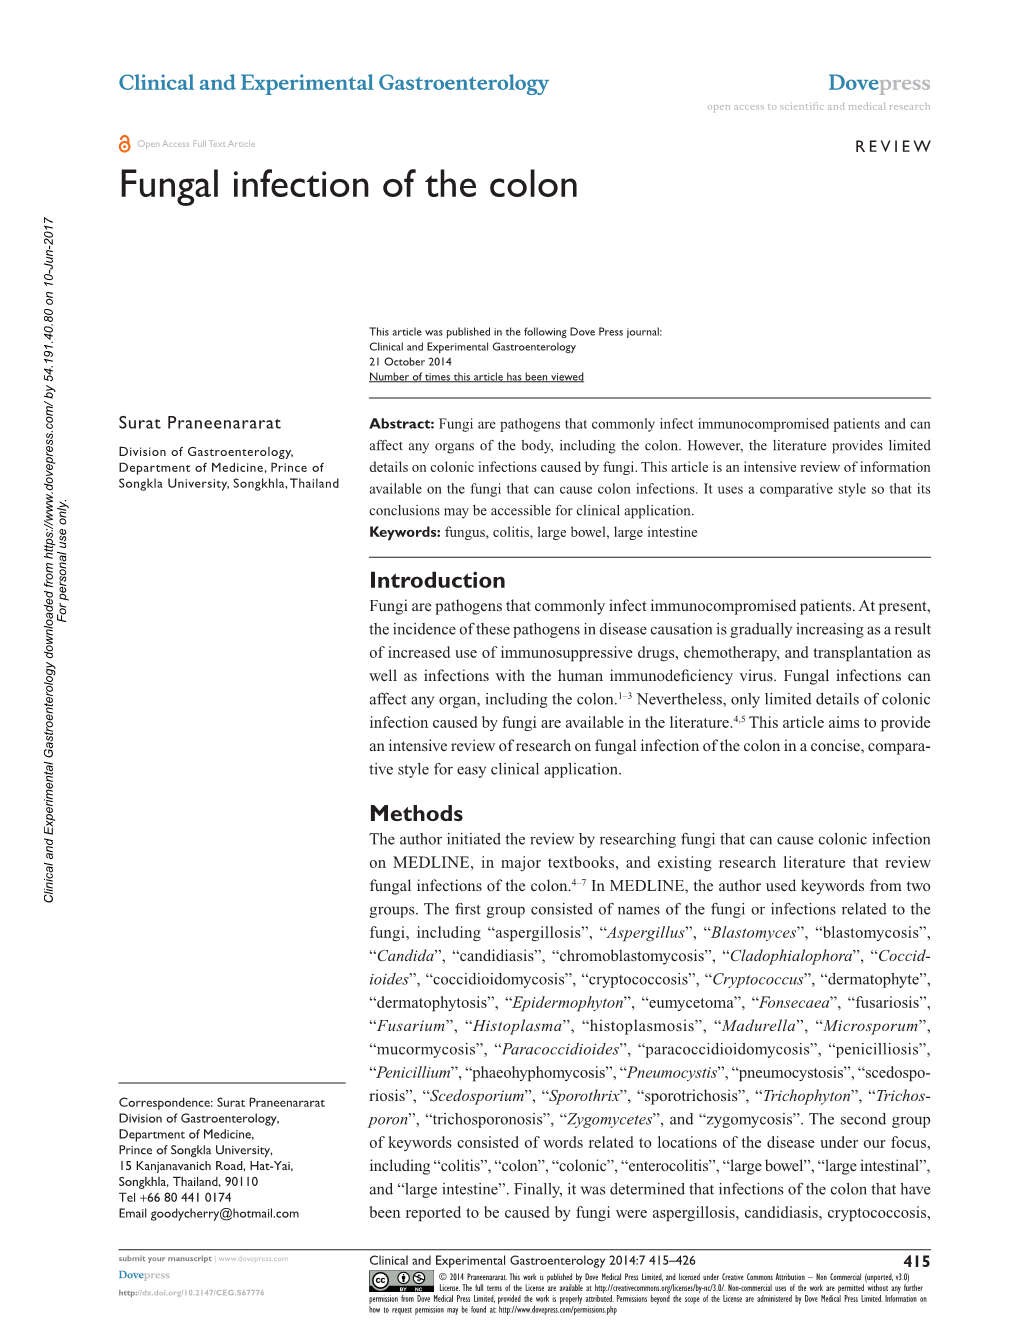 Fungal Infection of the Colon